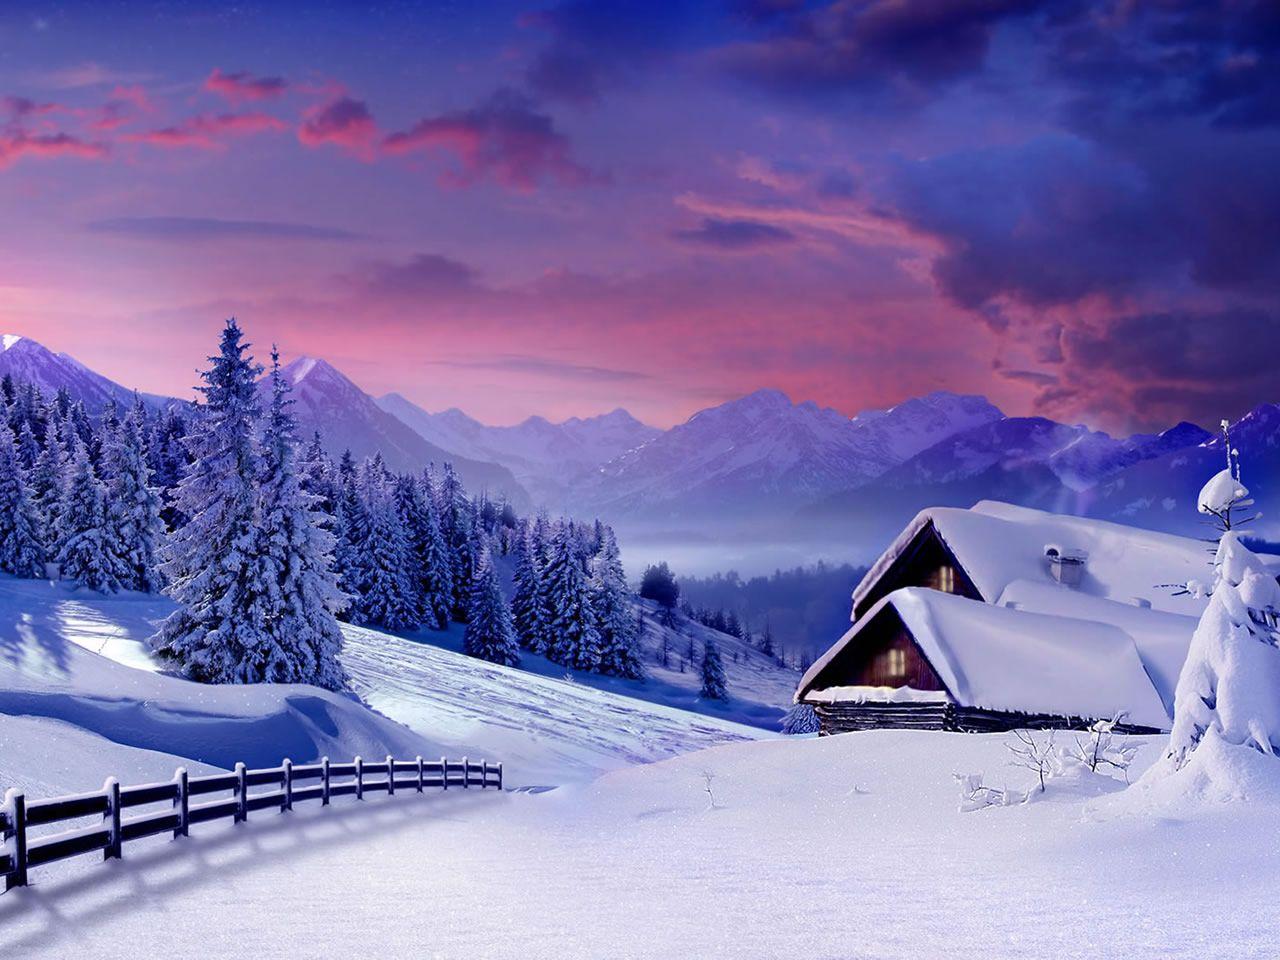 Pink Sunset Wallpaper Winter Cabins Fence Pines Purple Sky